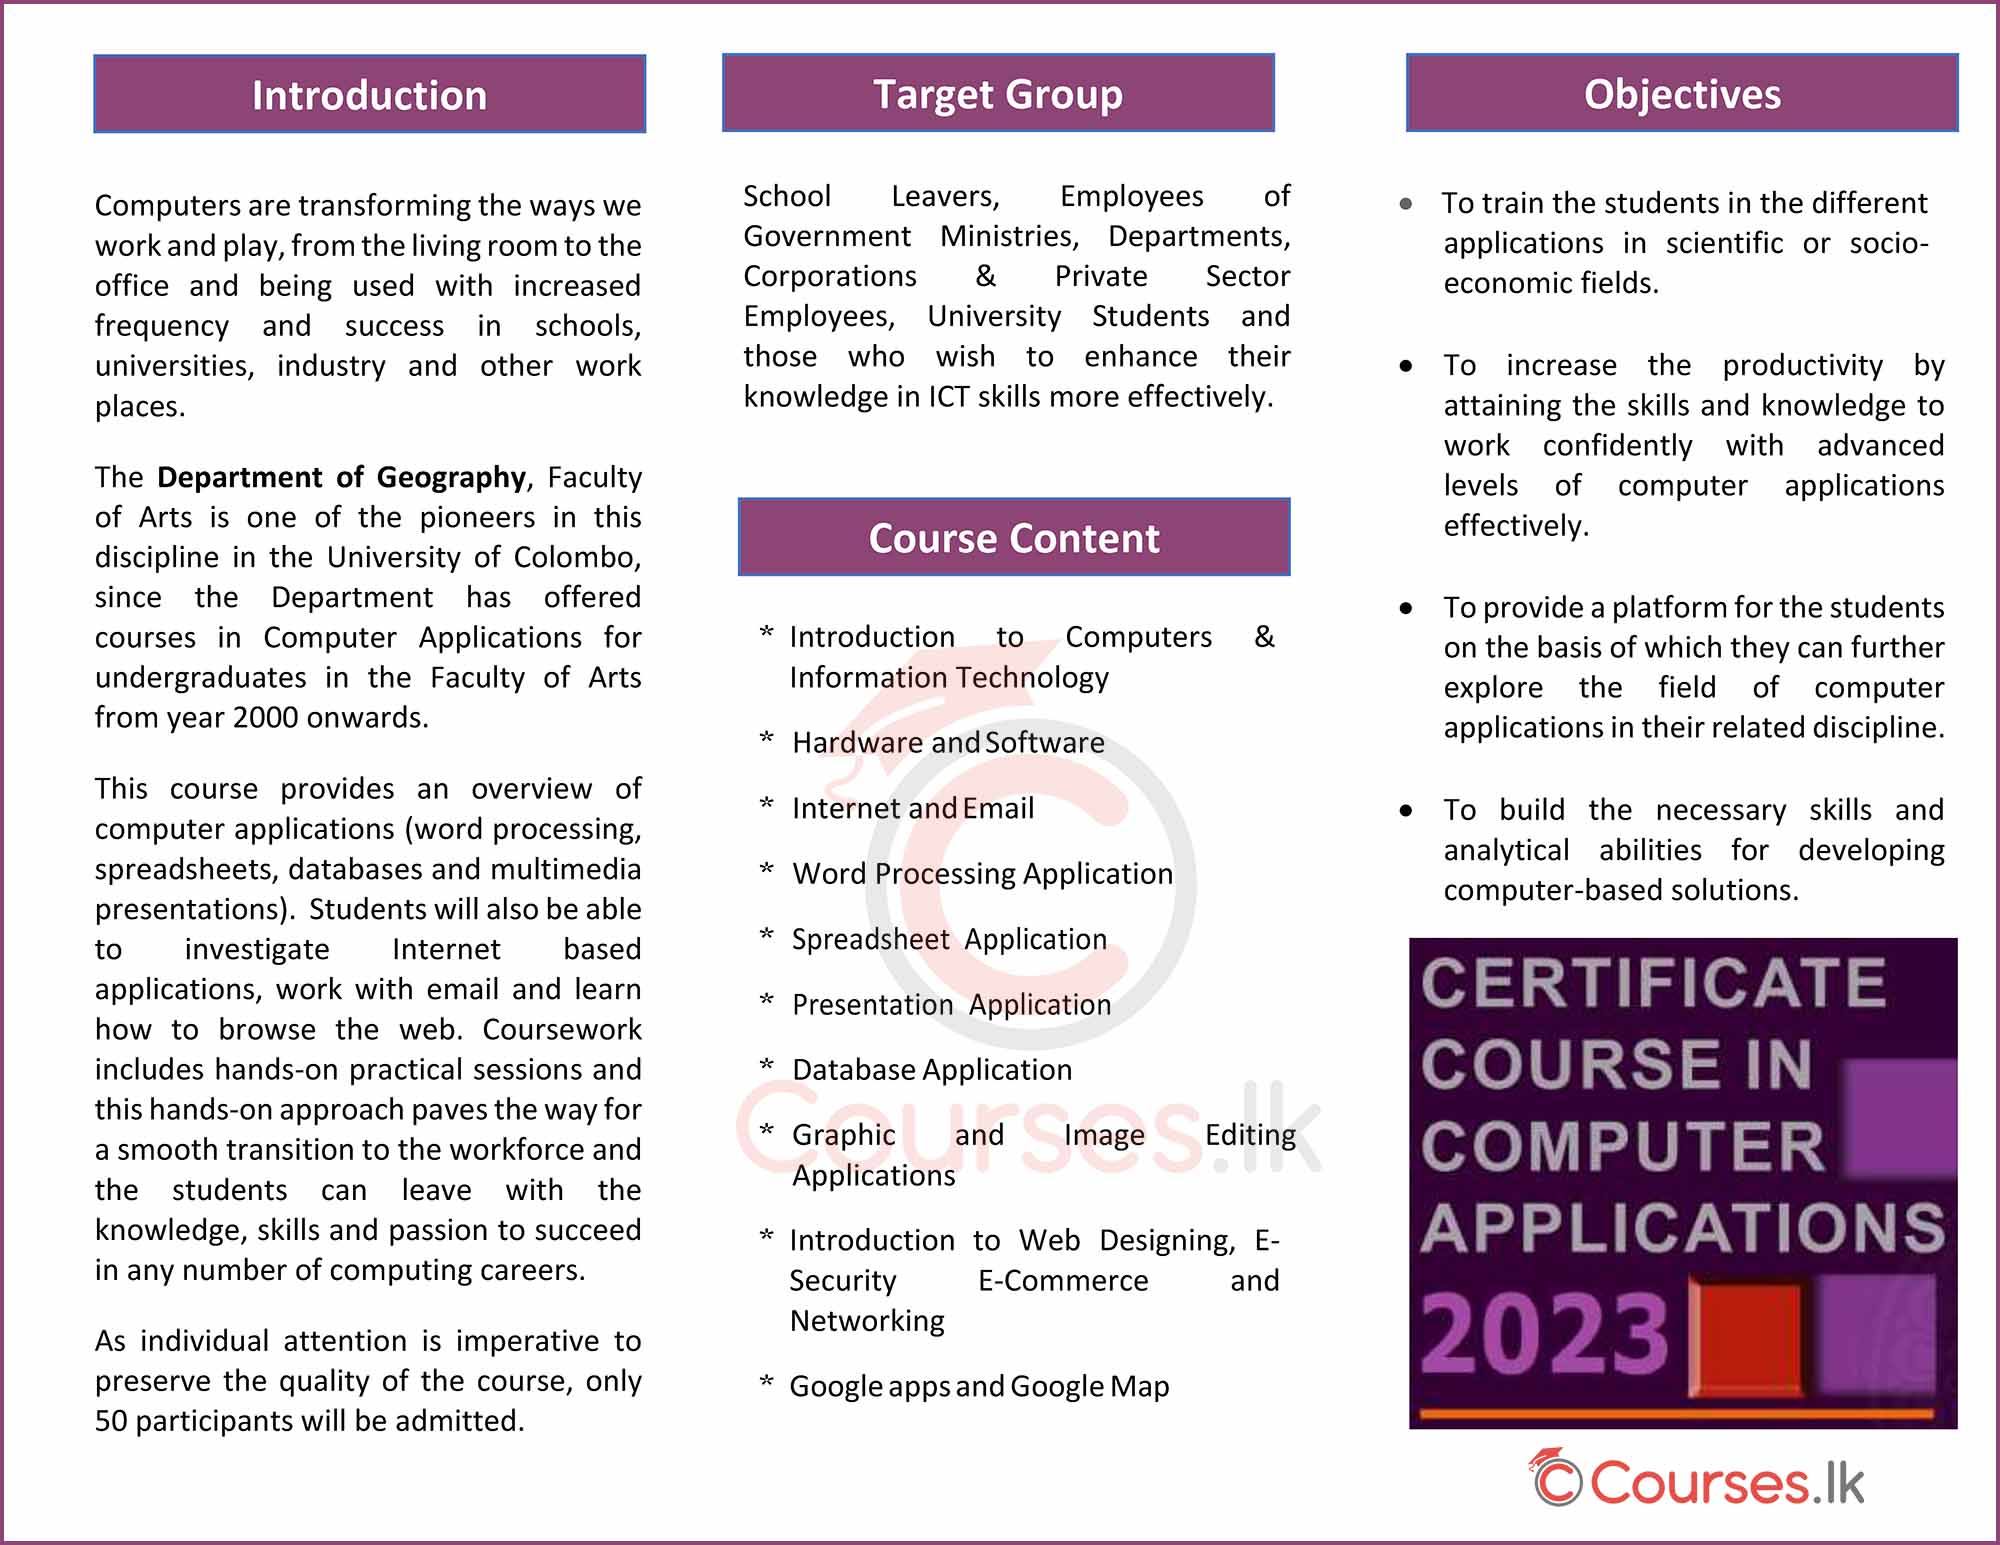 Certificate Course in Computer Applications 2023 - Department of Geography, University of Colombo